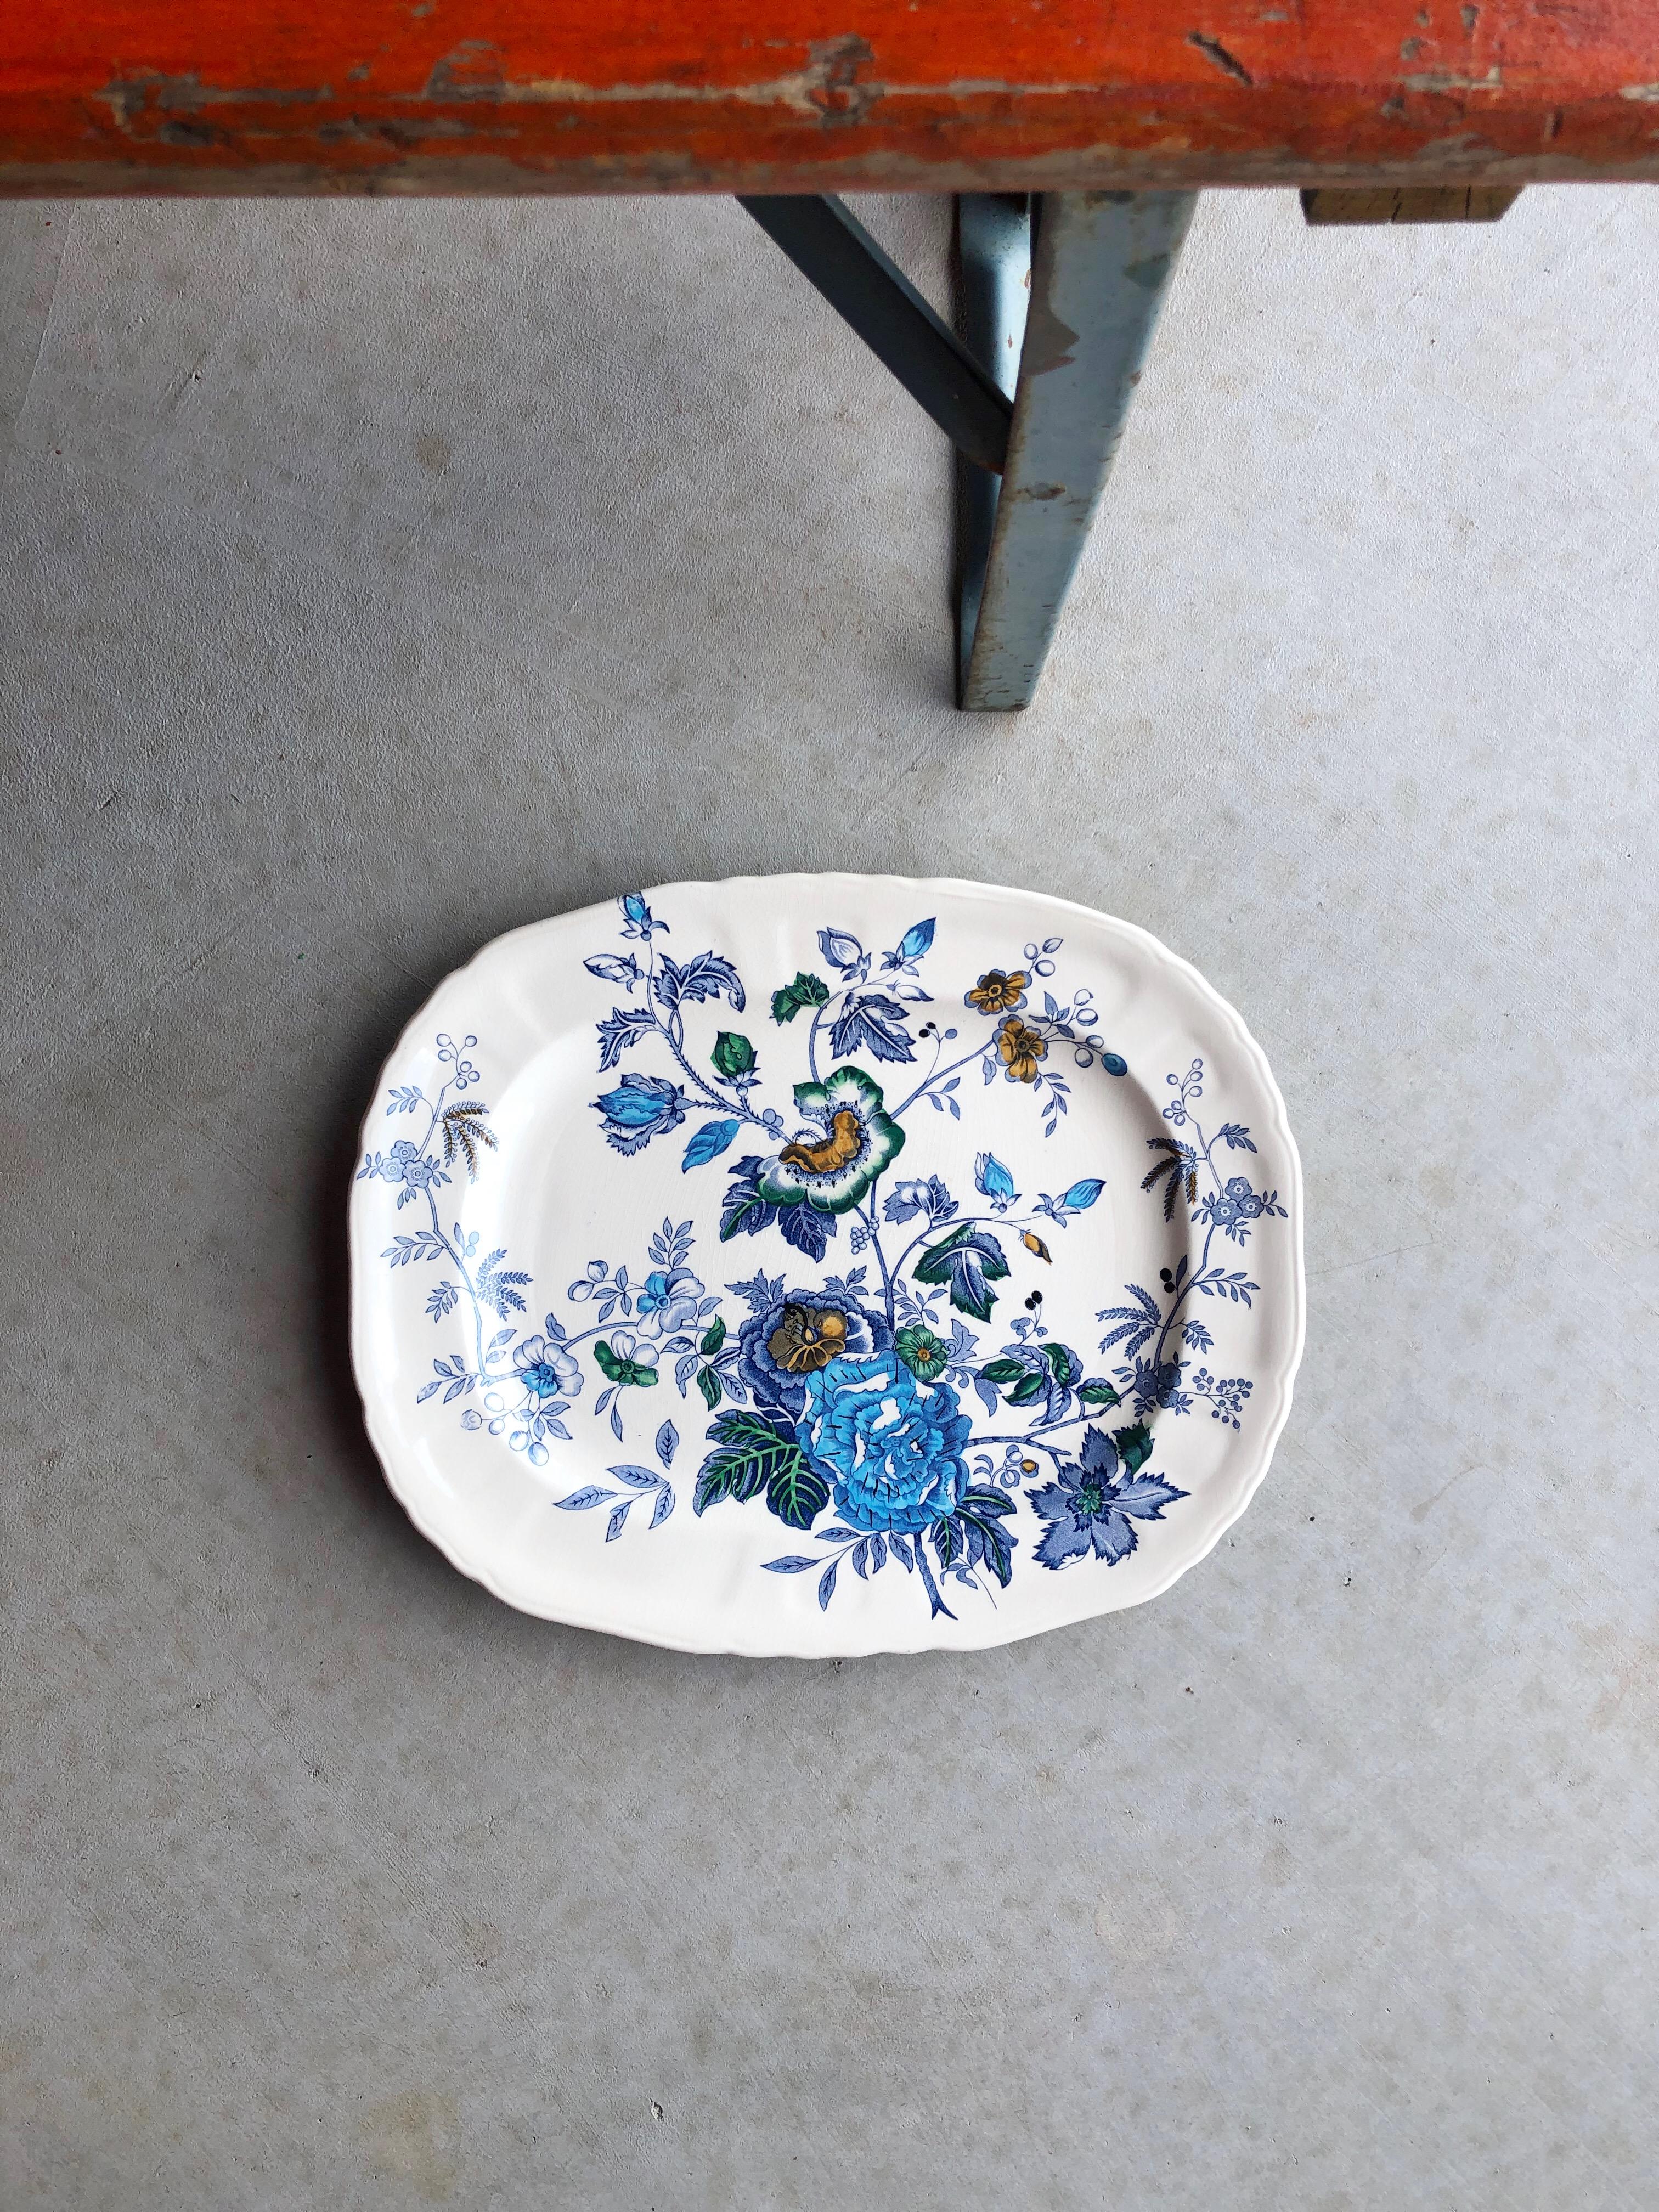 Mason’s Patent Ironstone “Belvedere” Platter, Made in England. Bright blue floral pattern to this oblong piece, depicting a wild assortment of blue flowers, vines and richly colored leaves. Pops of cobalt, turquoise, sea green and ochre yellow